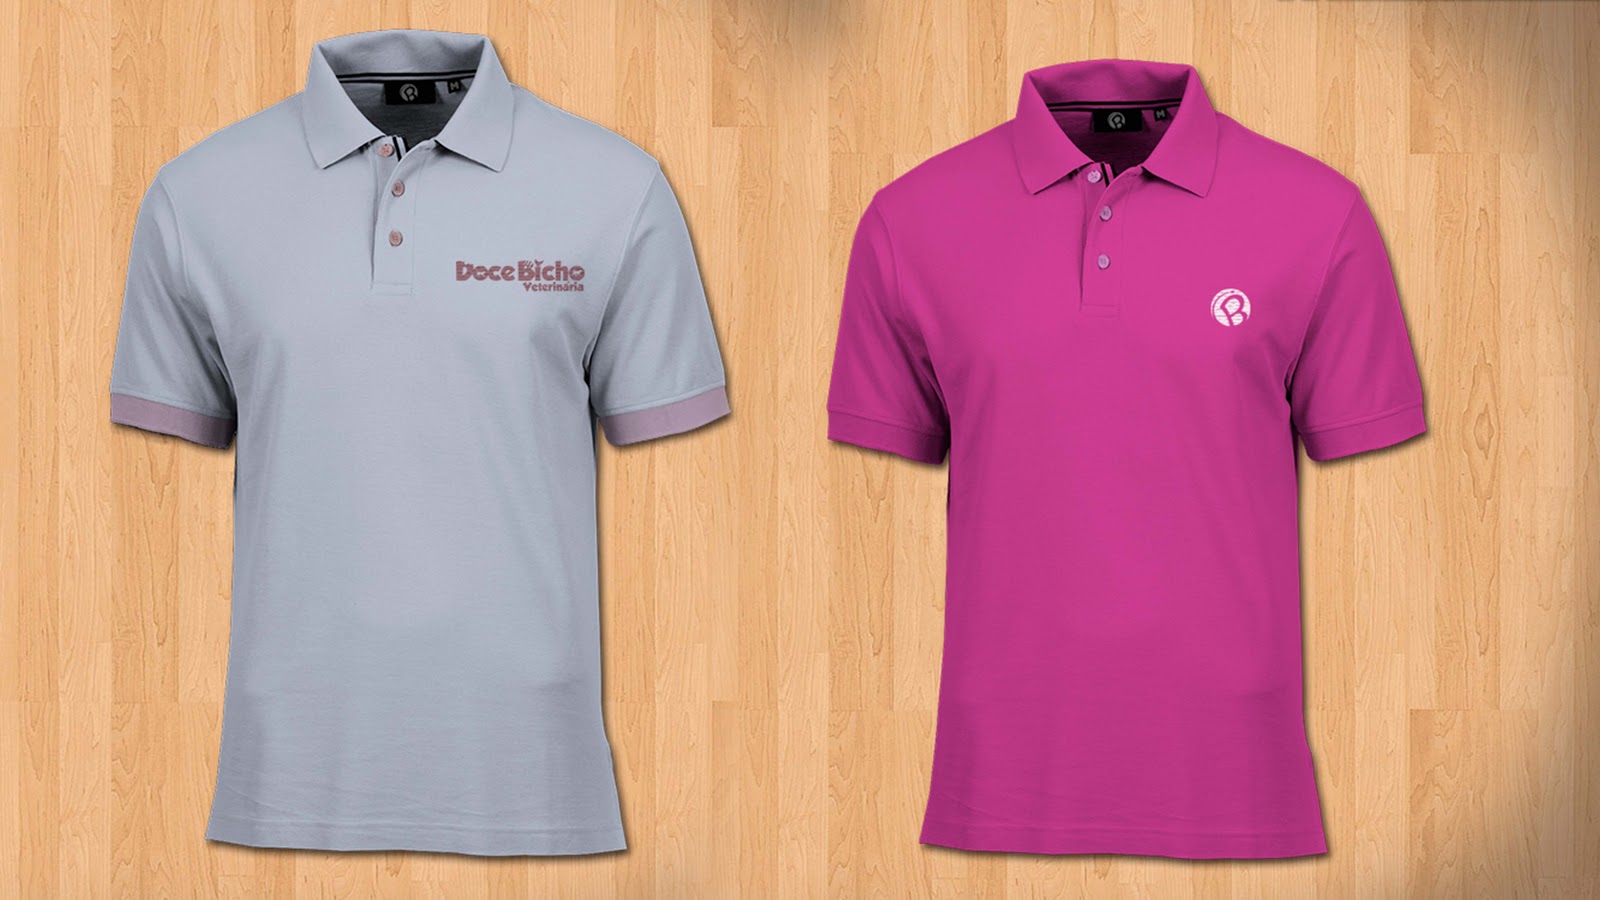 Download Free PSD Mockup | Polo Shirt - Graphic Temple